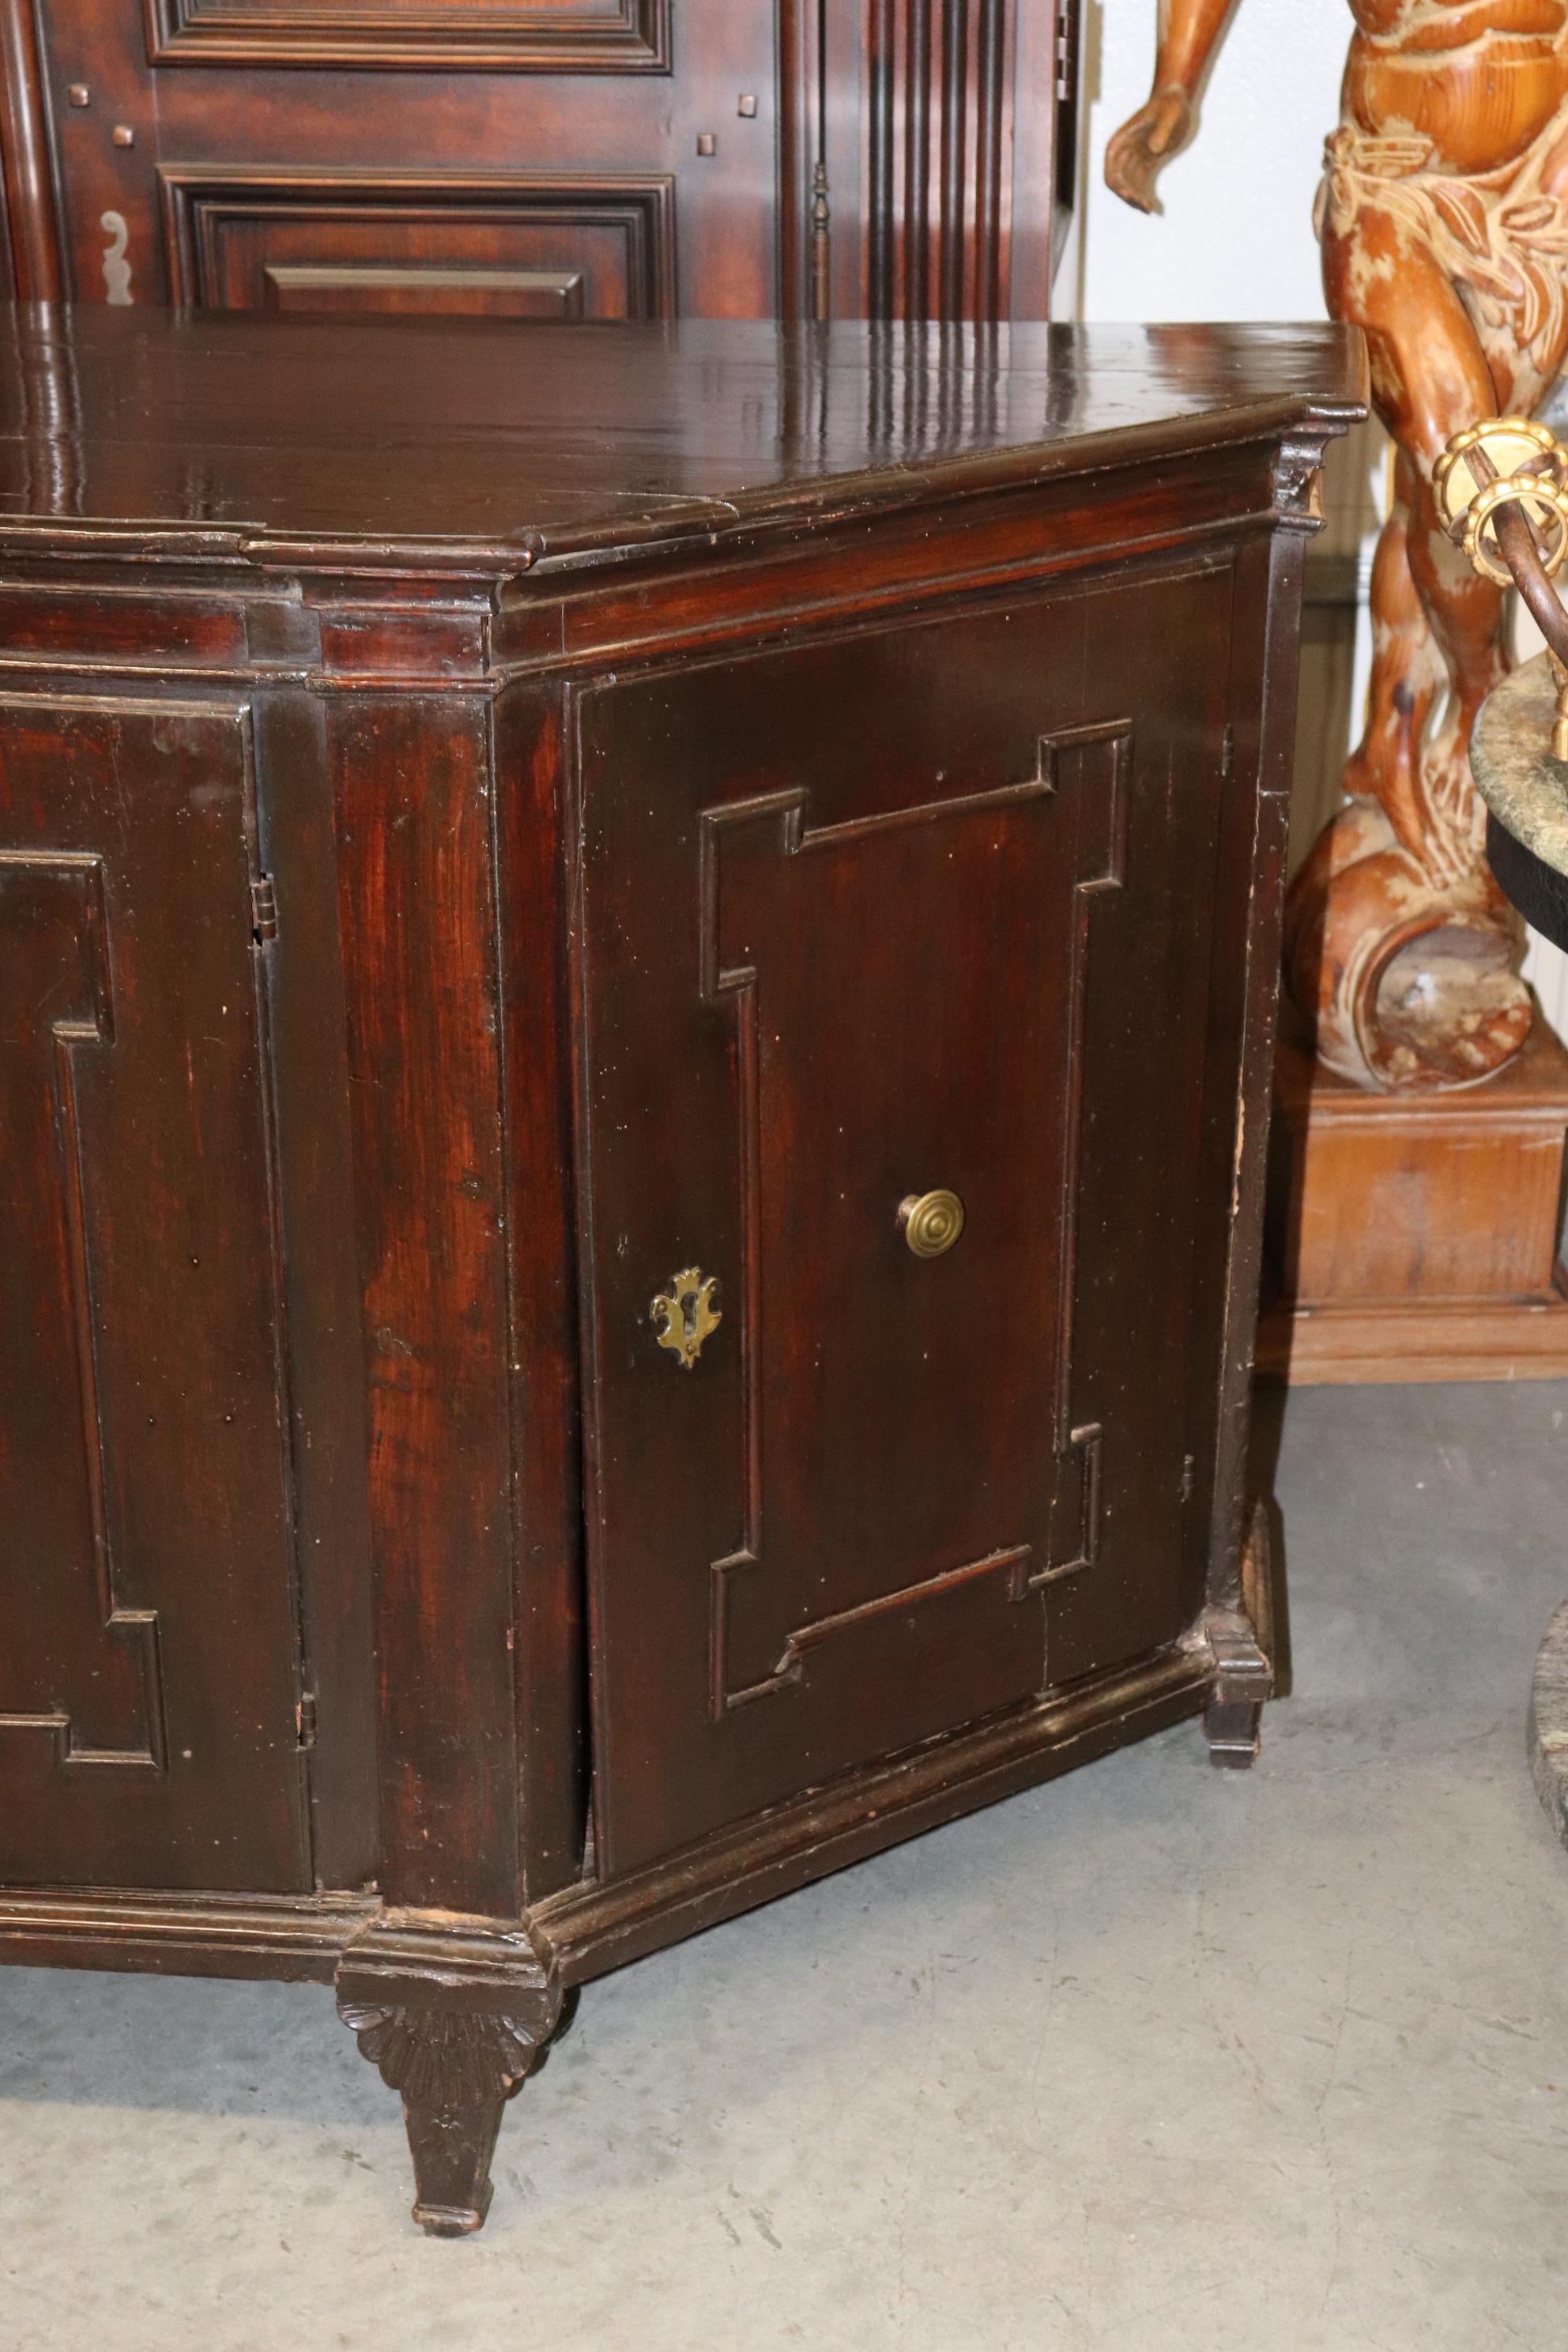 Rare Period French 1790s era Directoire Mahogany Sideboard Buffet For Sale 2